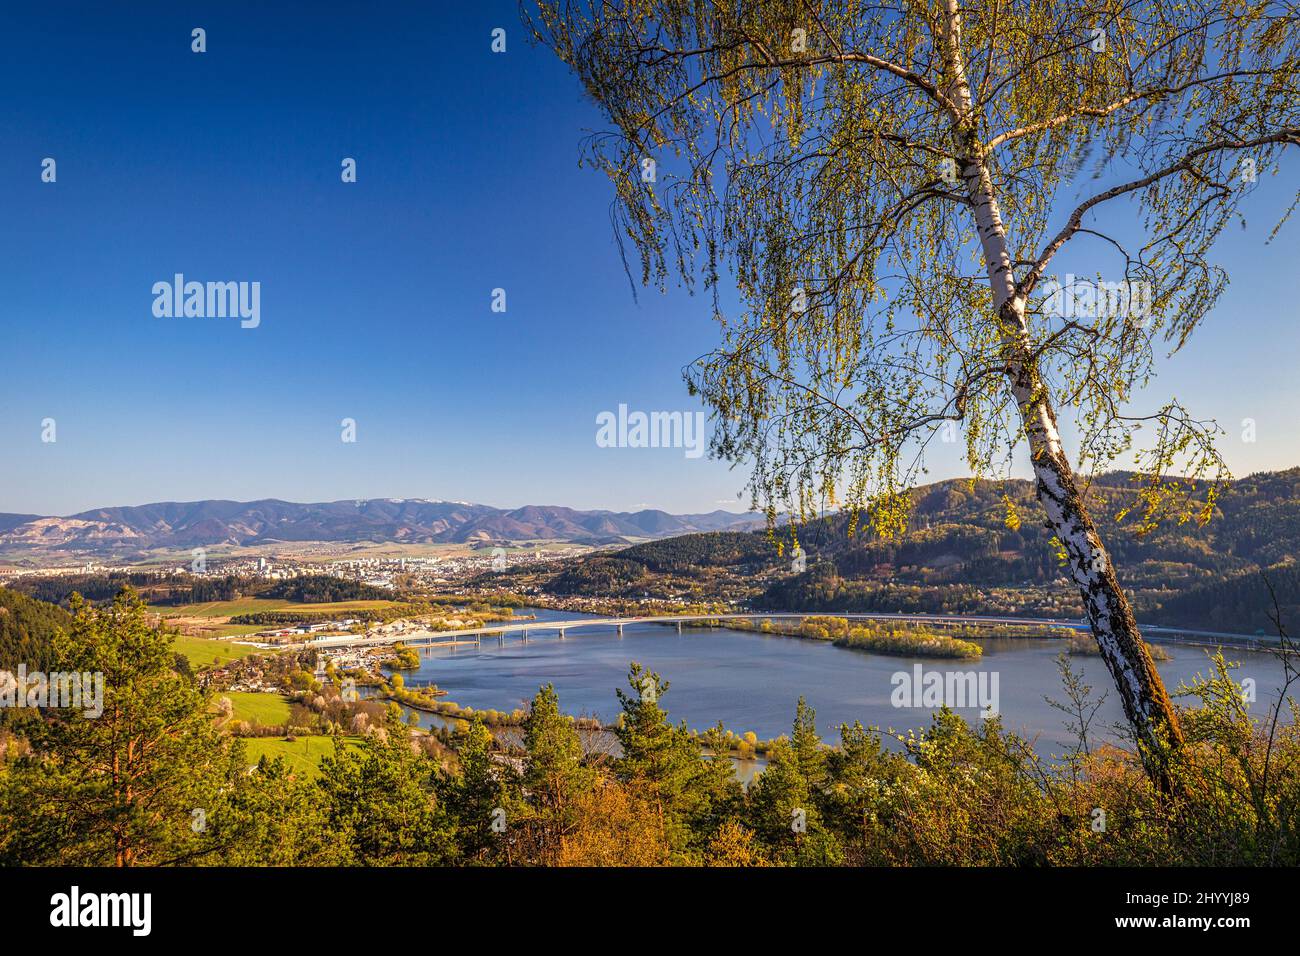 Top view of the Zilina basin and the Hricov dam on the Vah river, Slovakia, Europe. Stock Photo